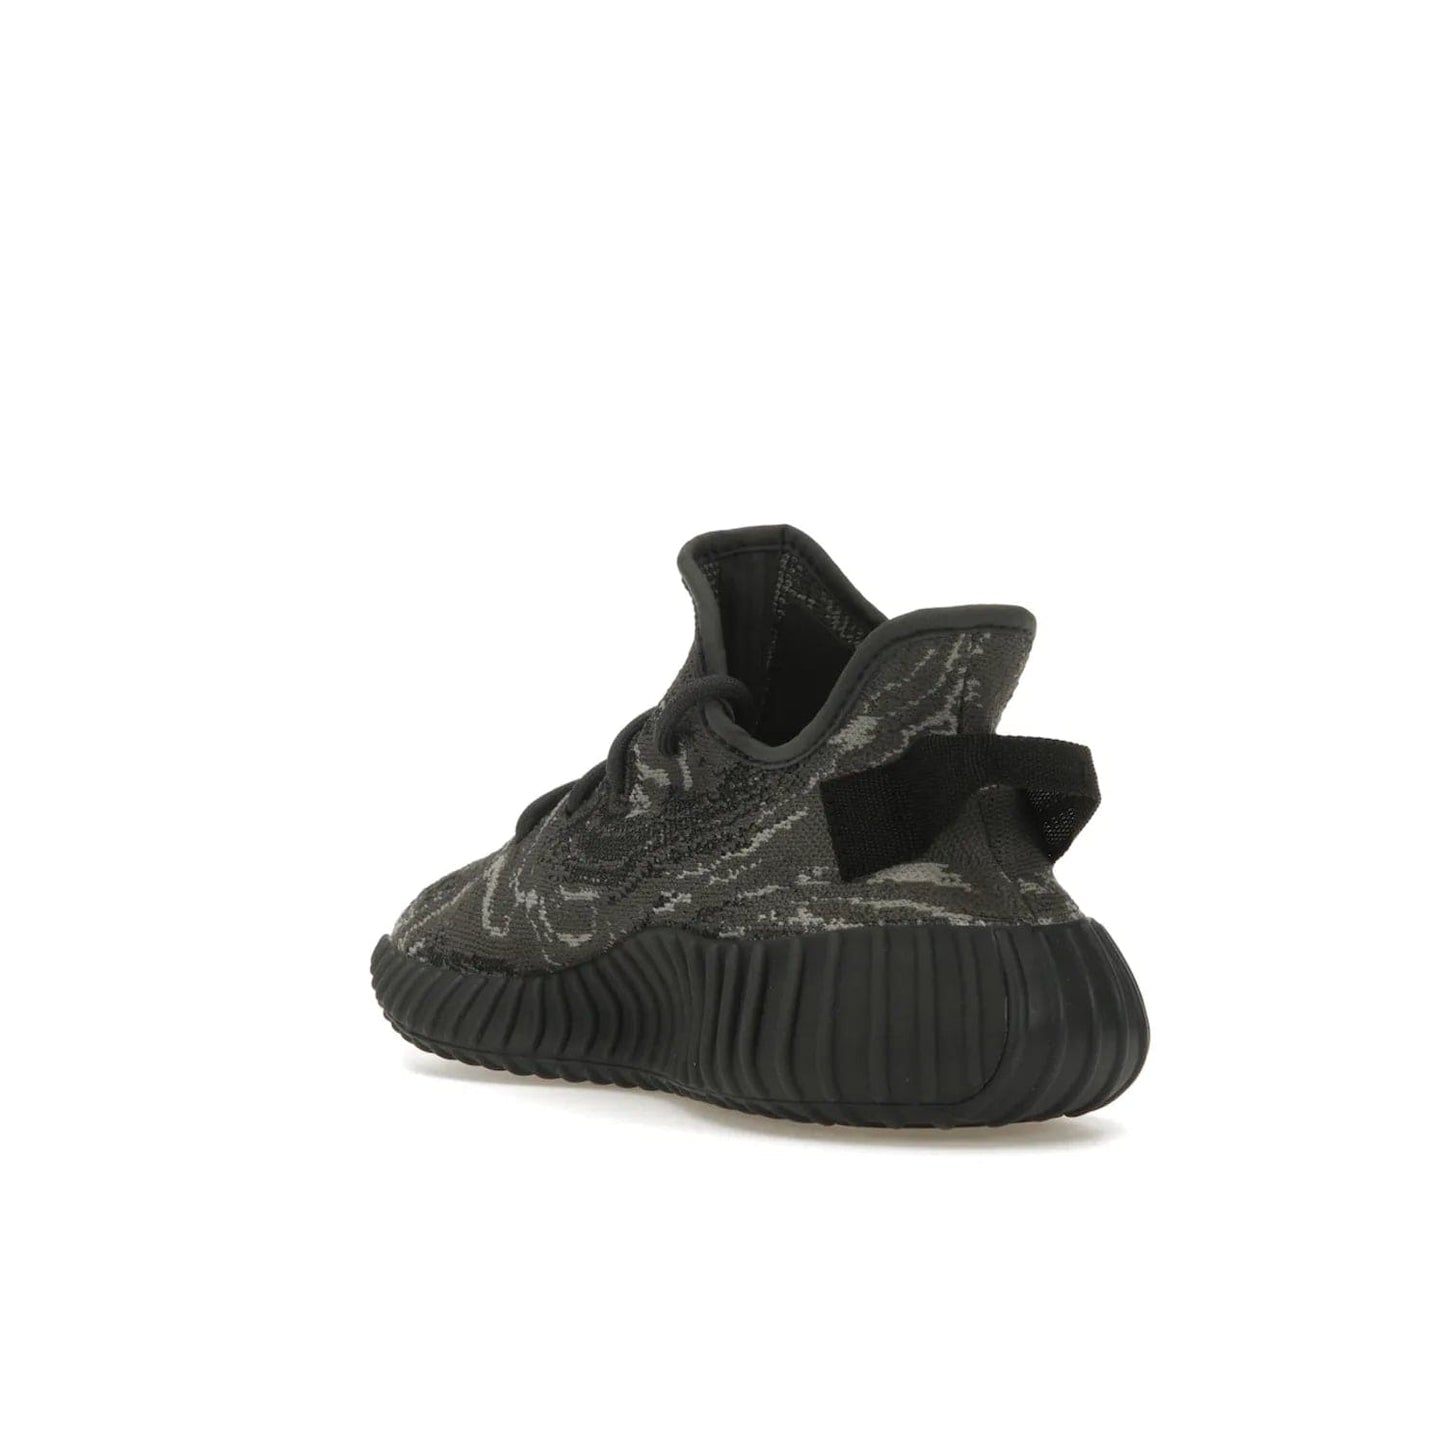 adidas Yeezy Boost 350 V2 MX Dark Salt - Image 25 - Only at www.BallersClubKickz.com - ##
The adidas Yeezy Boost 350 V2 MX Dark Salt offers a contemporary look with a signature combination of grey and black hues. Cushioned Boost midsole and side stripe allow for all day wear. Get the perfect fashion-forward addition with this sleek sneaker for $230.